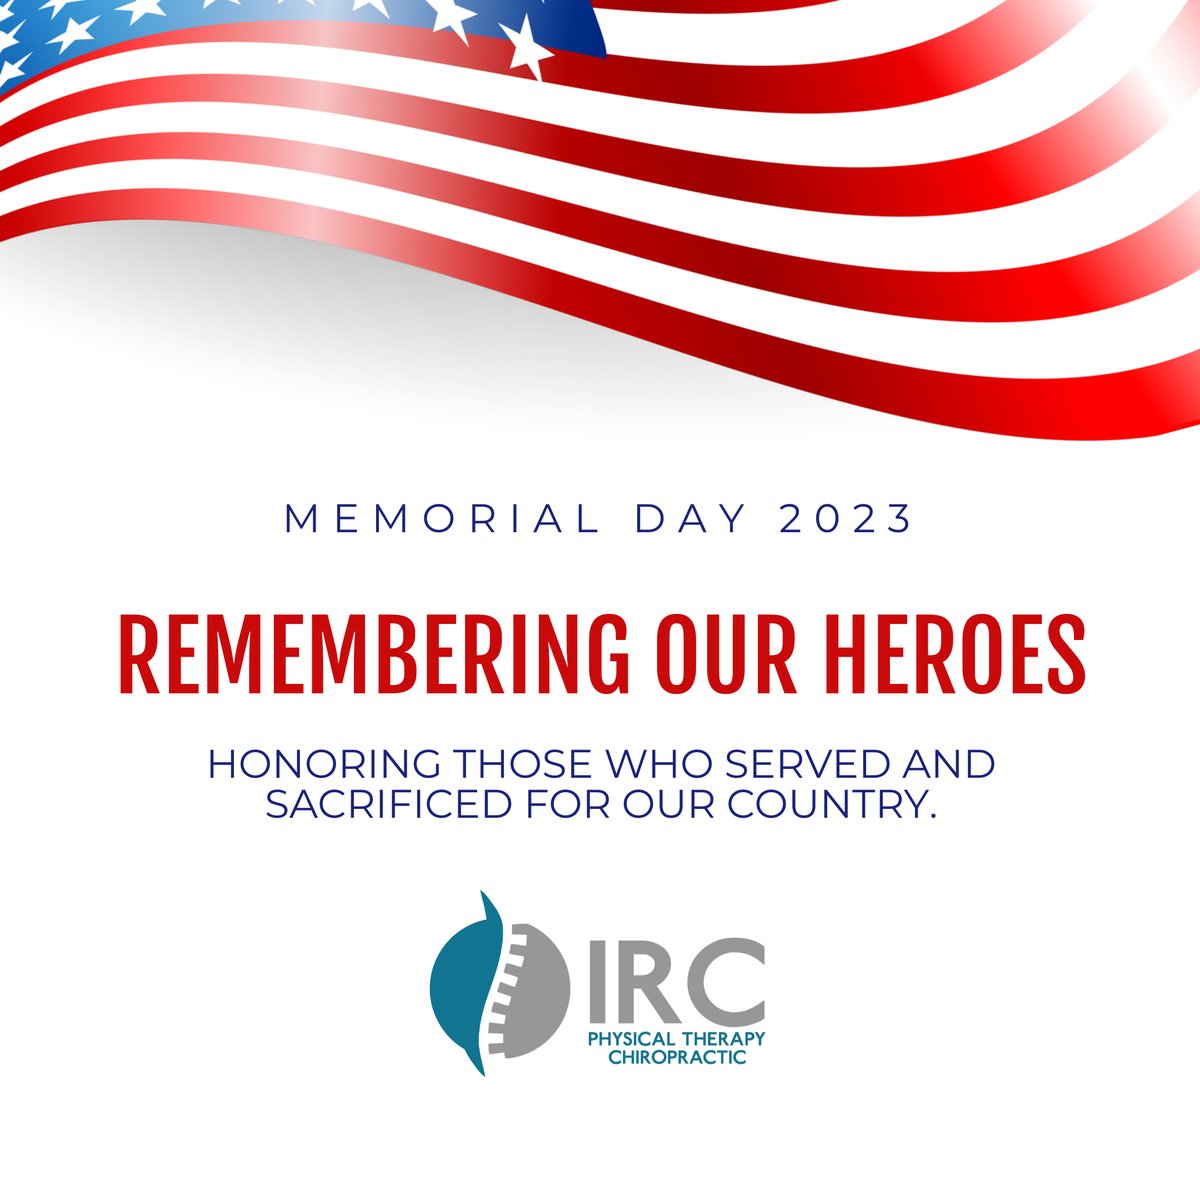 Thank you to all who served and especially to those who gave all so that we may live free. Your service is still remembered. #memorialday #memorialday2023 #ircclinic #chiropractic #chiropractor #physicaltherapy #holidayweekend #holiday #honoring #fallensoldiers #heroes #usa